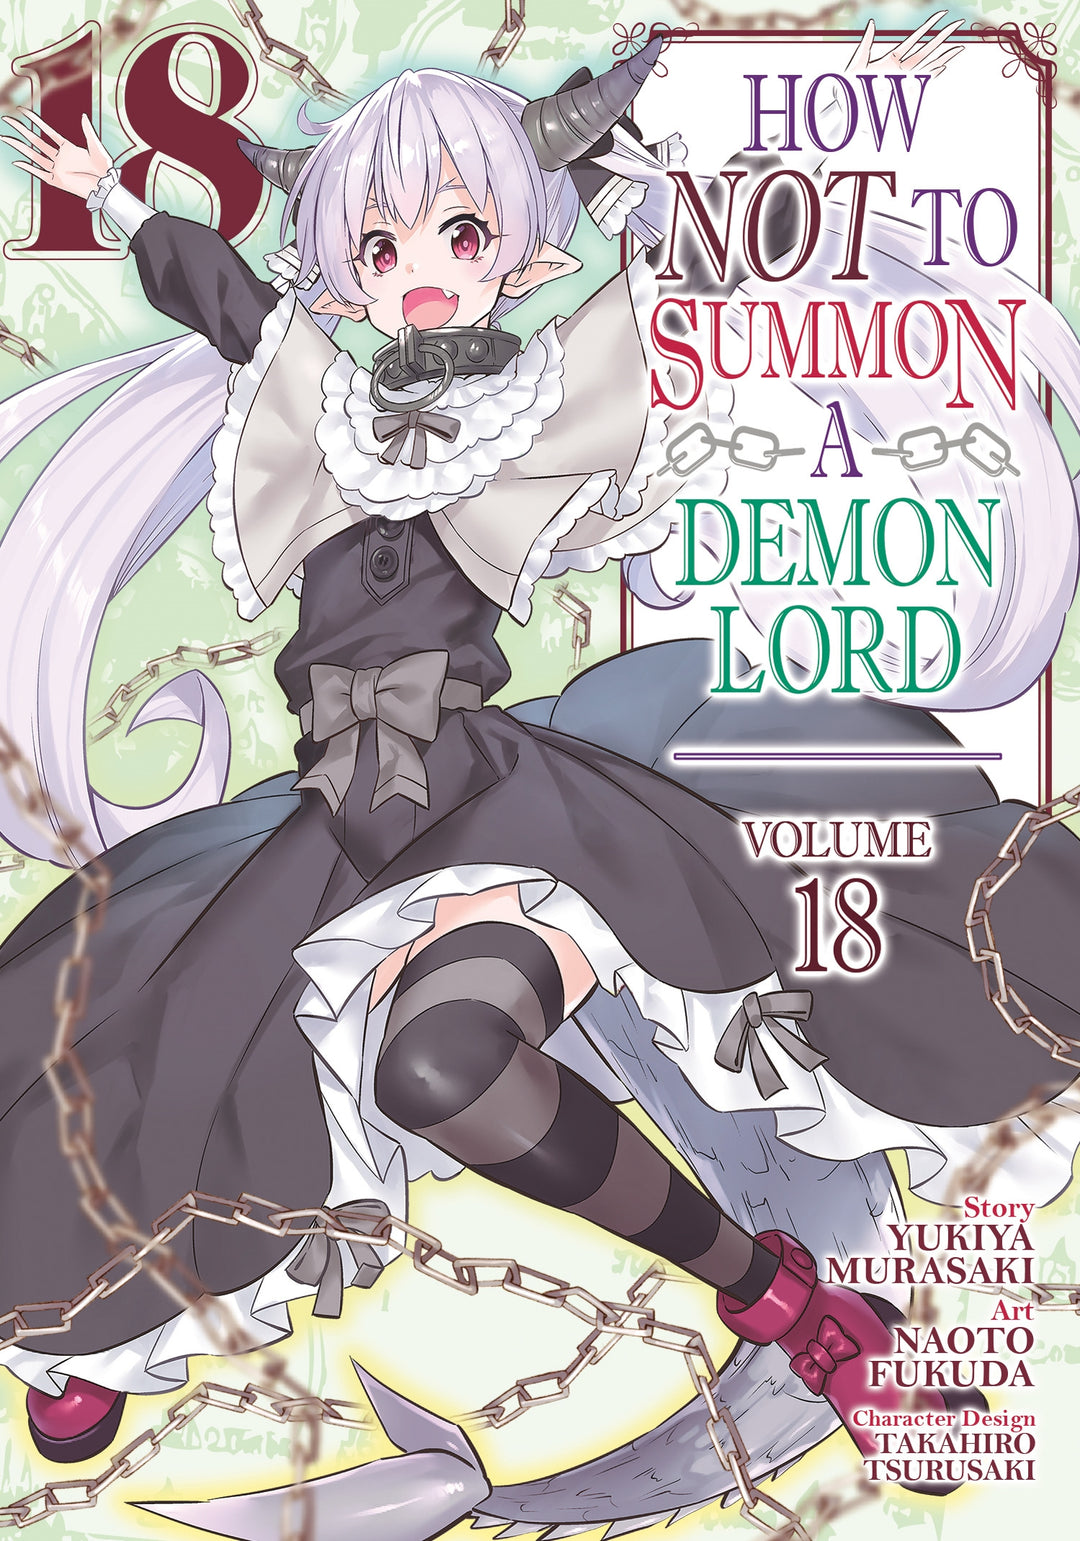 How NOT to Summon a Demon Lord (Manga), Vol. 18